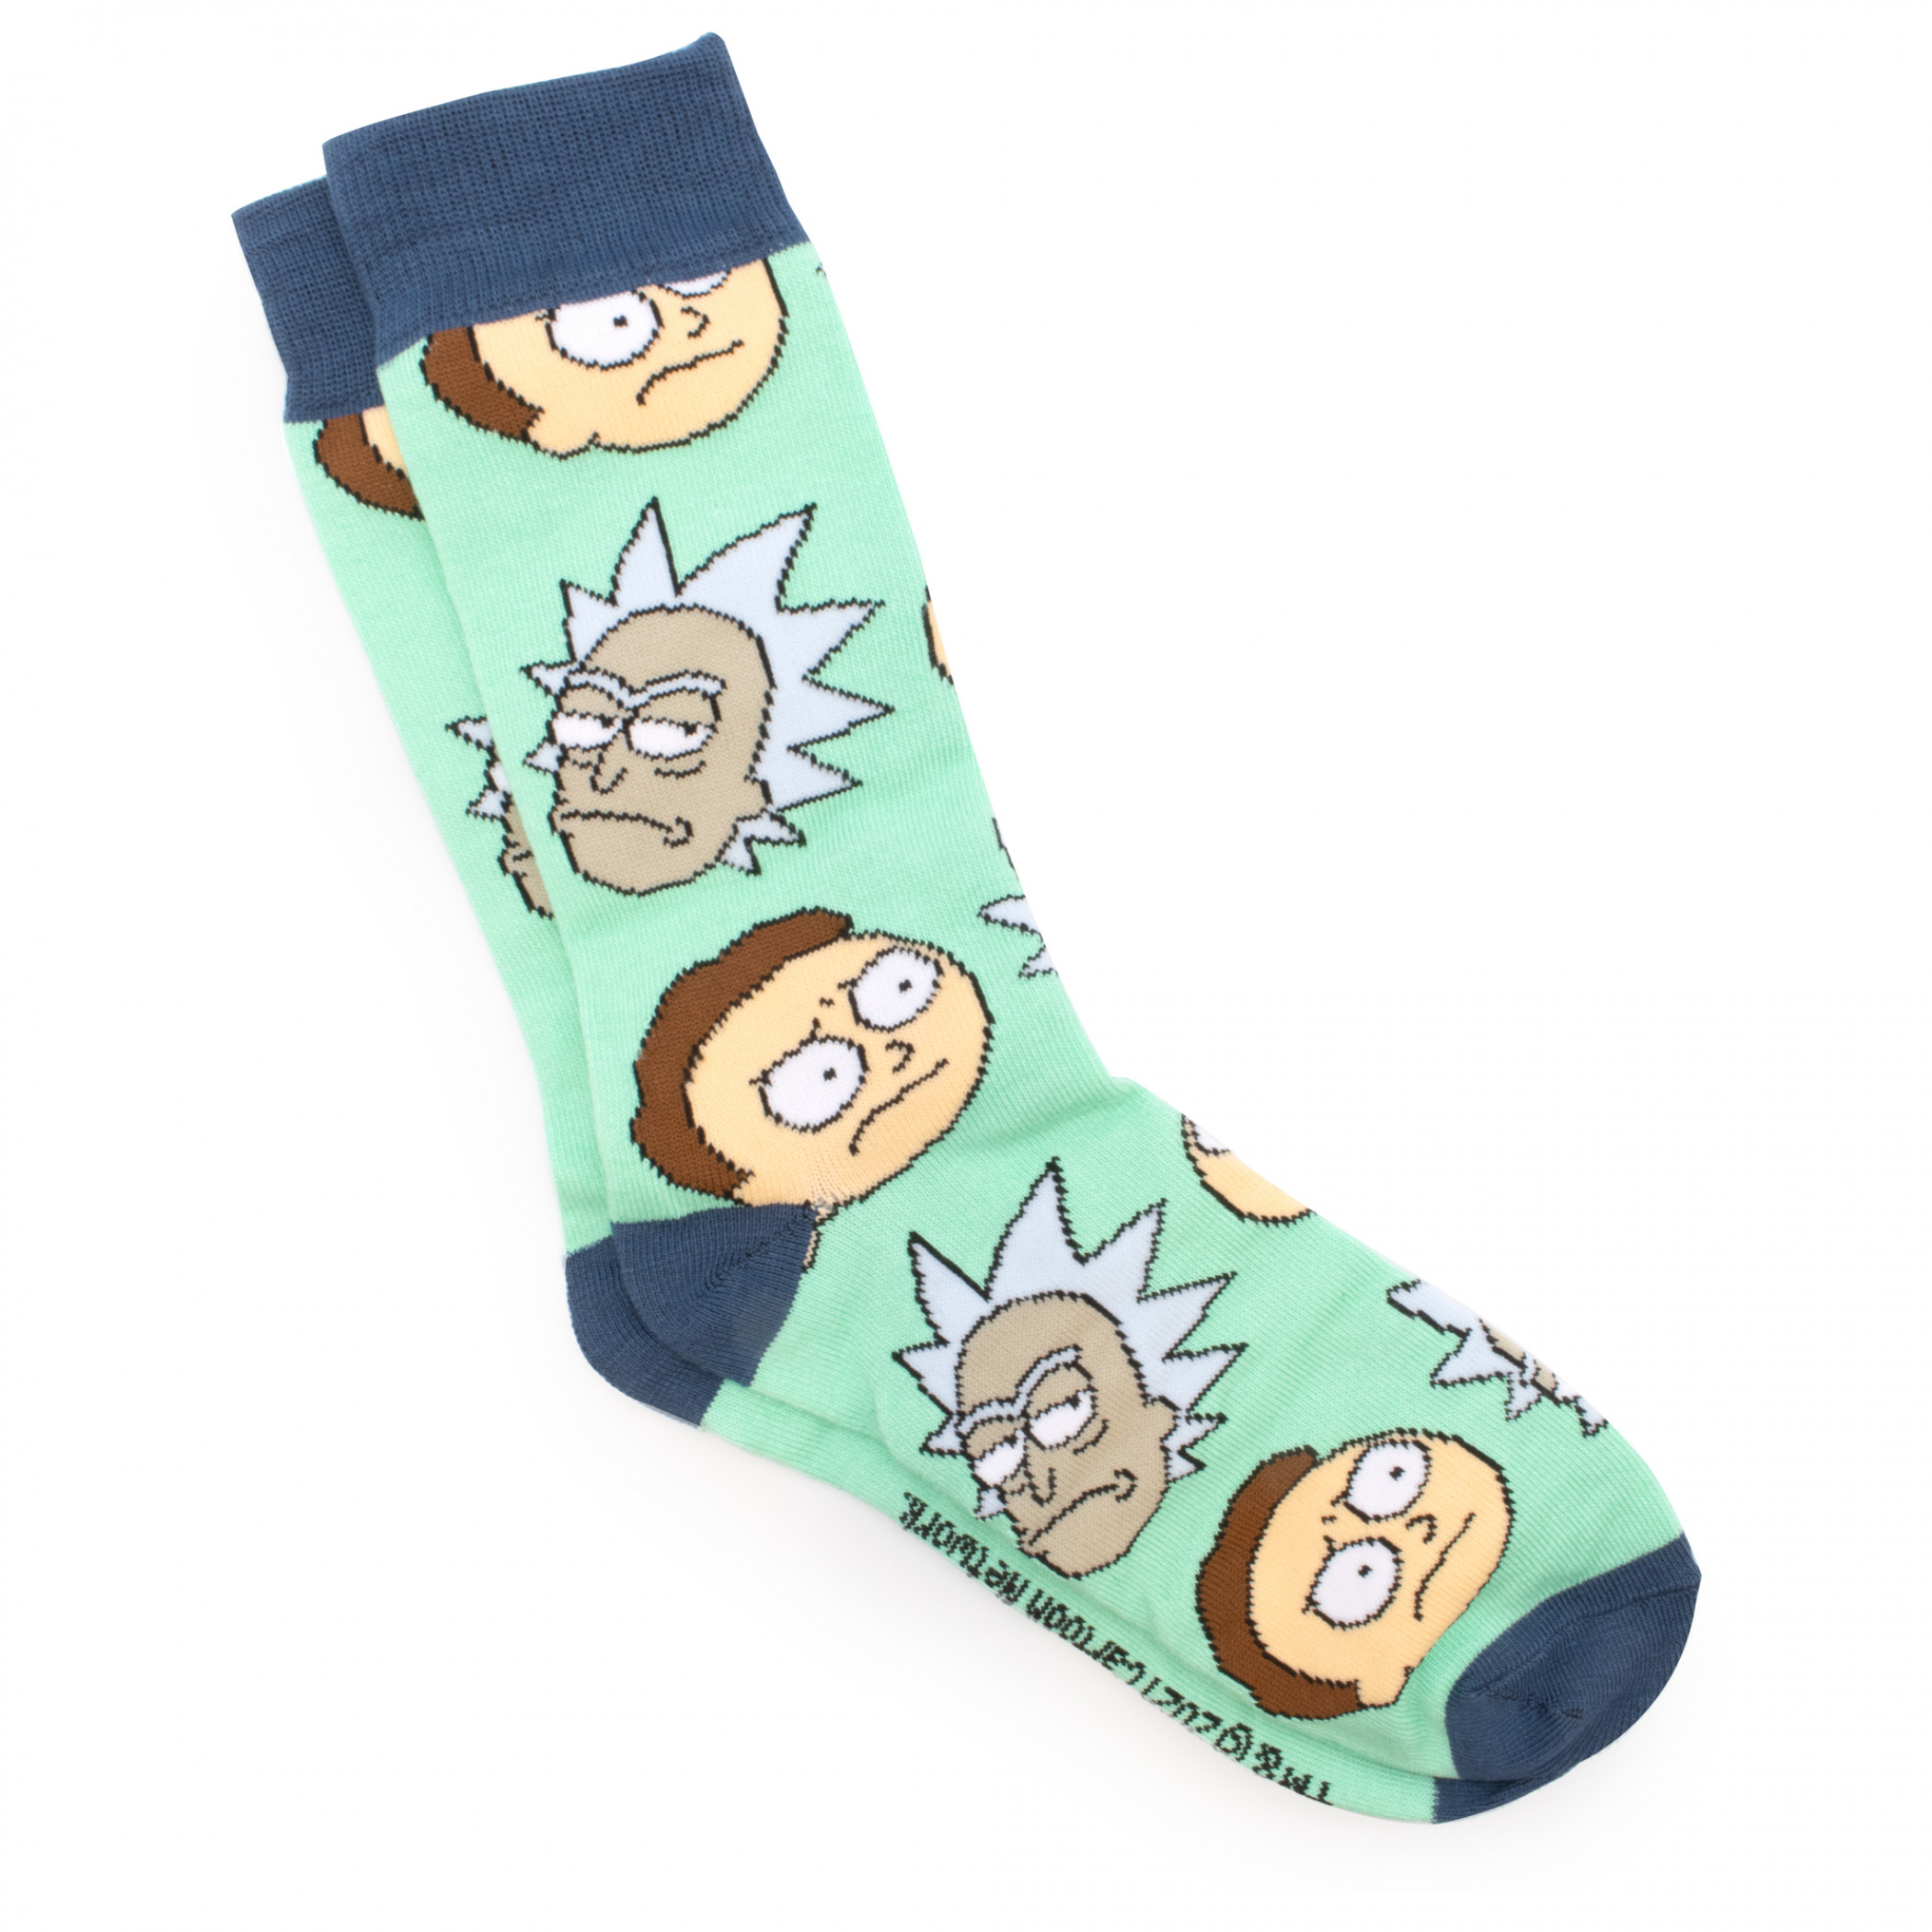 Rick & Morty 3-Pair Pack of Crew Socks and Pint Gift Set